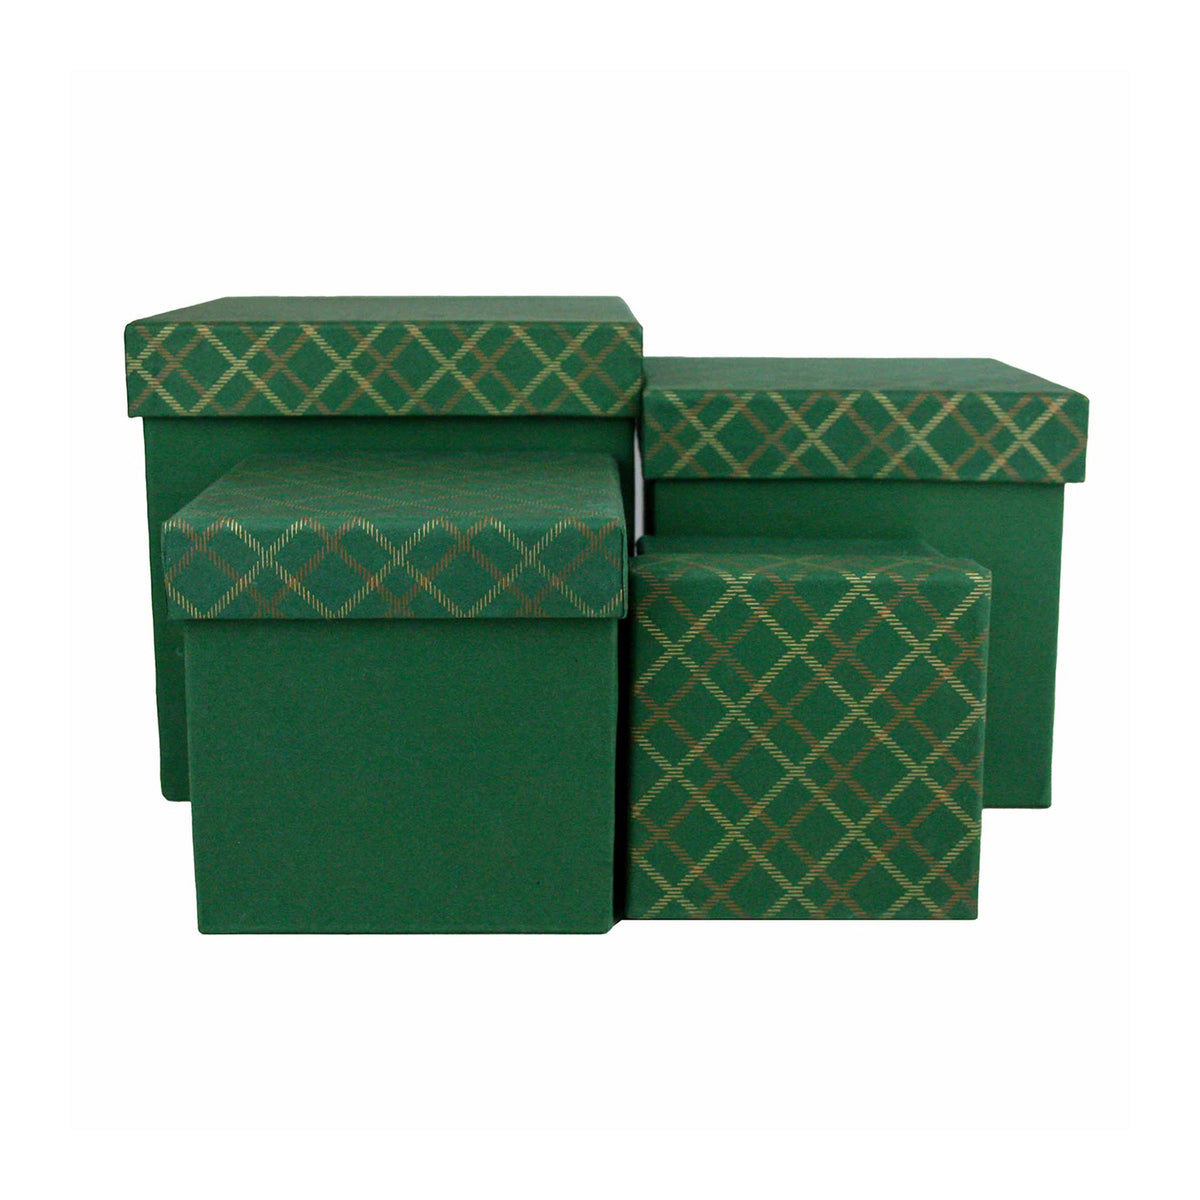 Set of 4 Handmade Green Chequered Gift Boxes